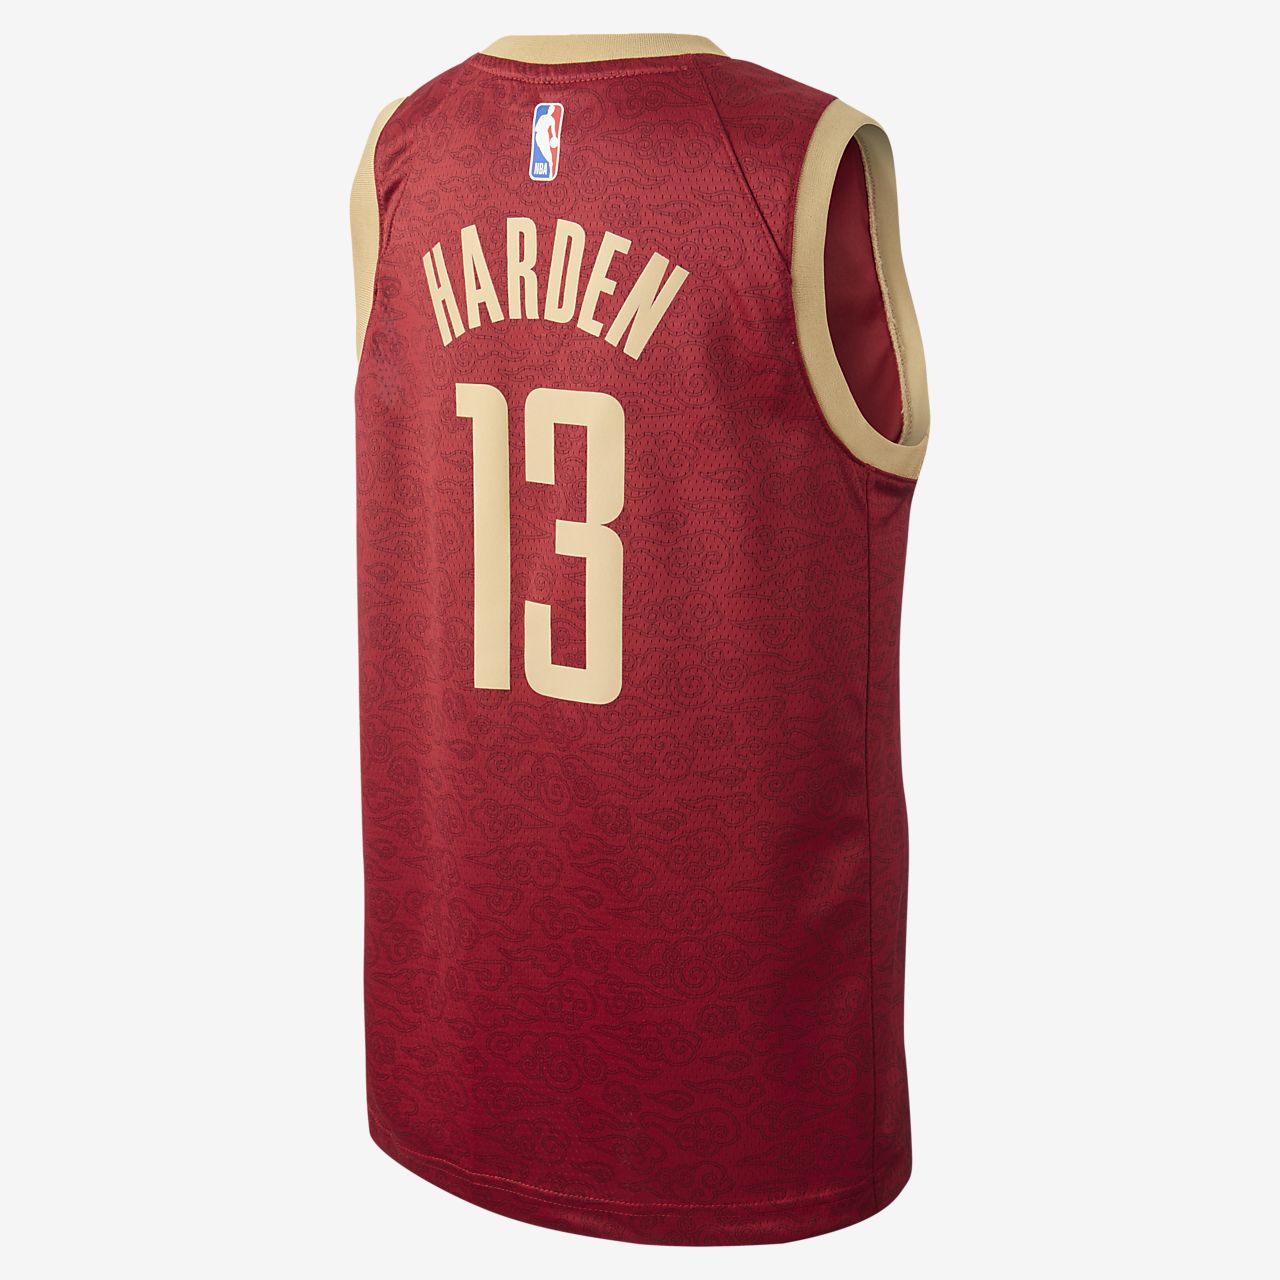 james harden jersey youth